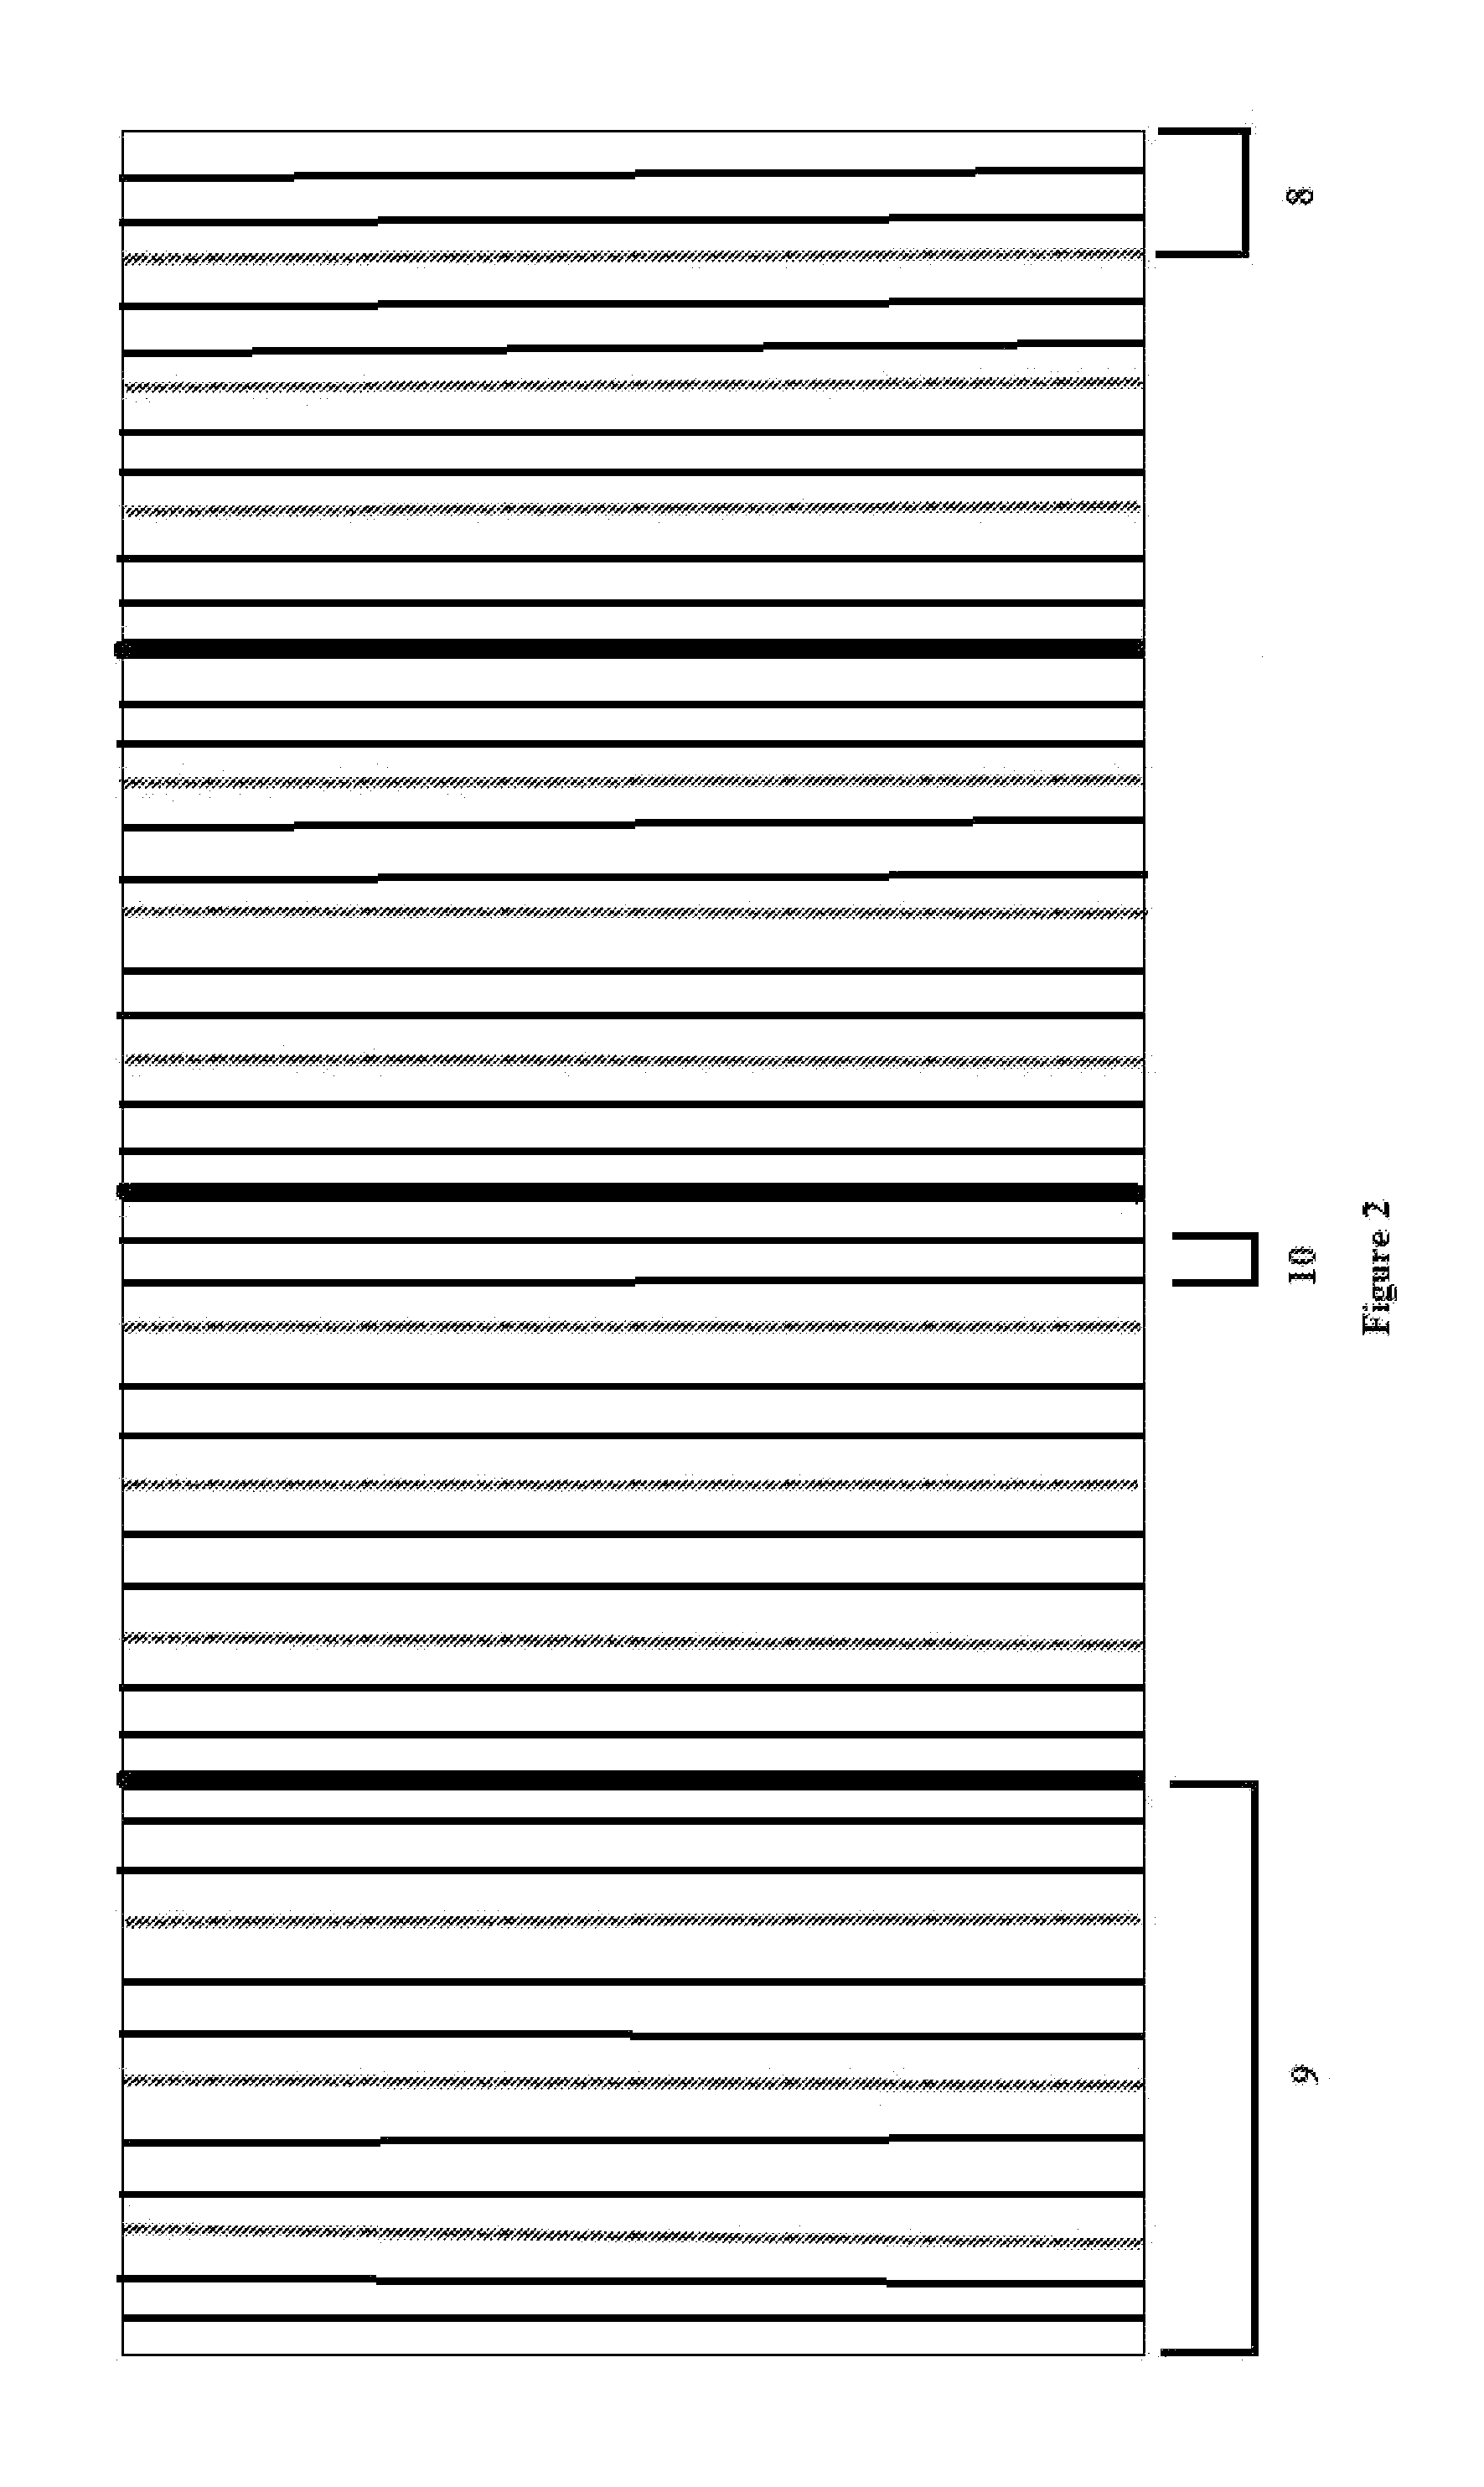 Multiple layer charge-coupled photovoltaic device